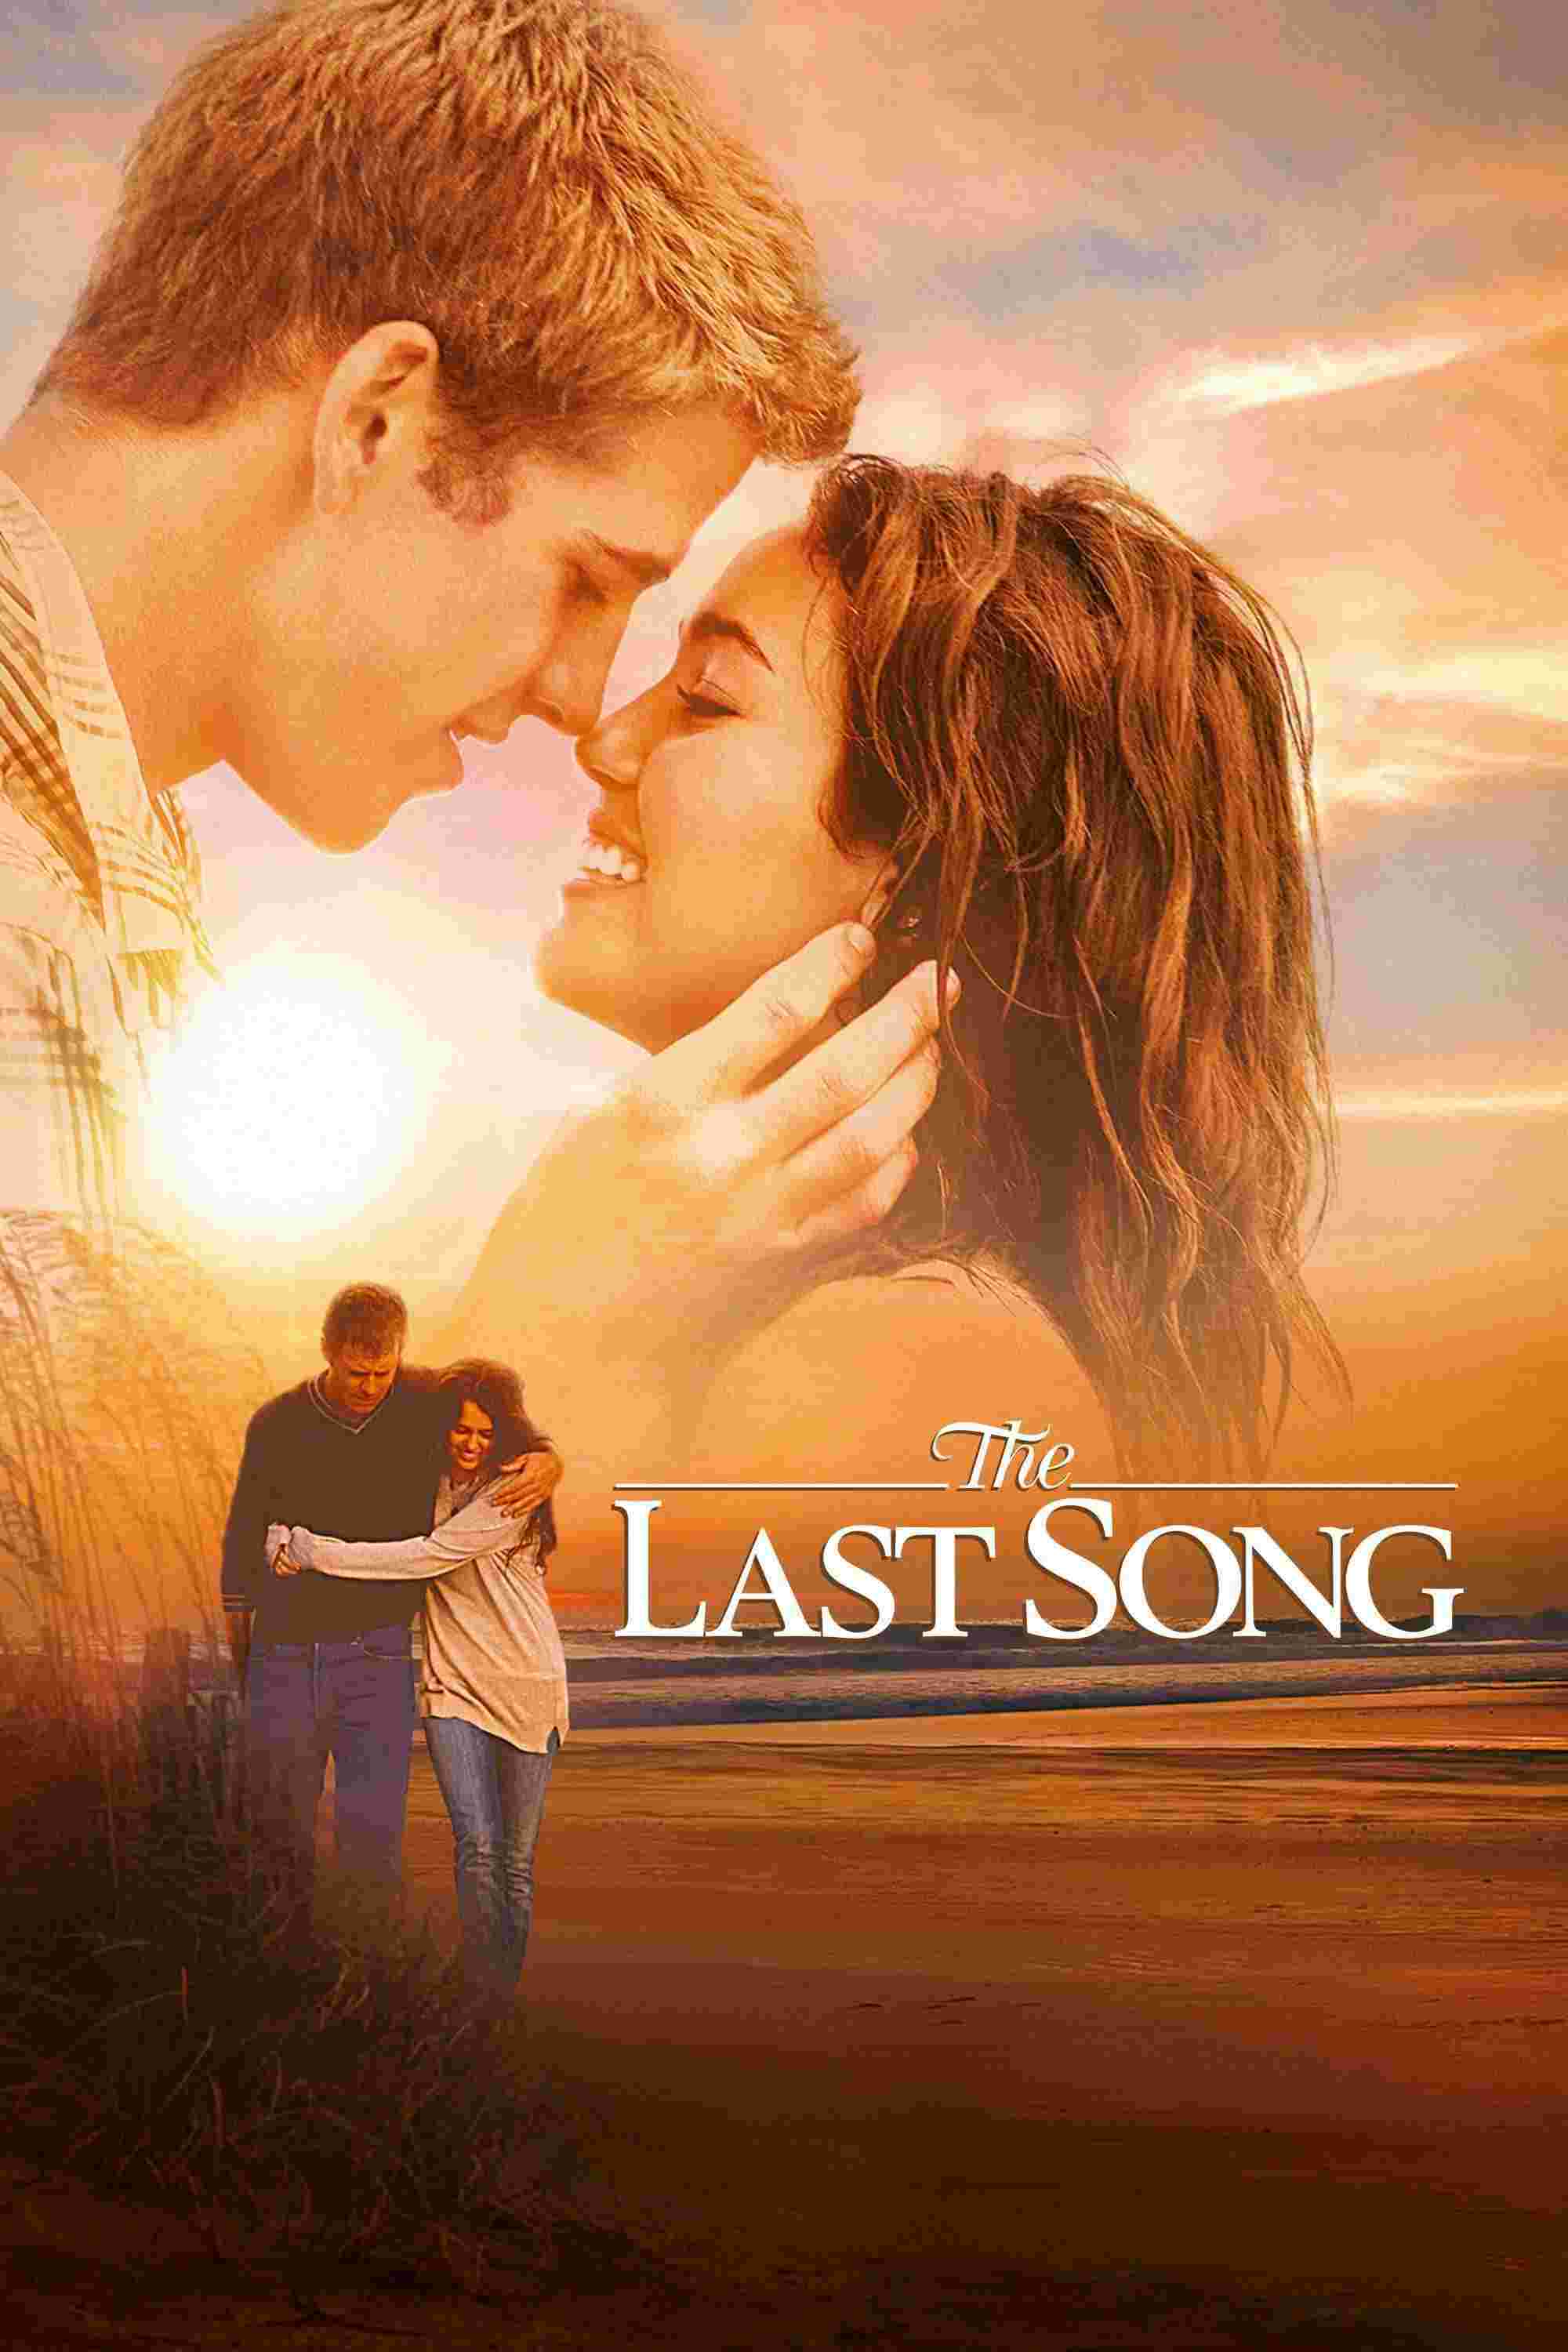 The Last Song (2010) Miley Cyrus